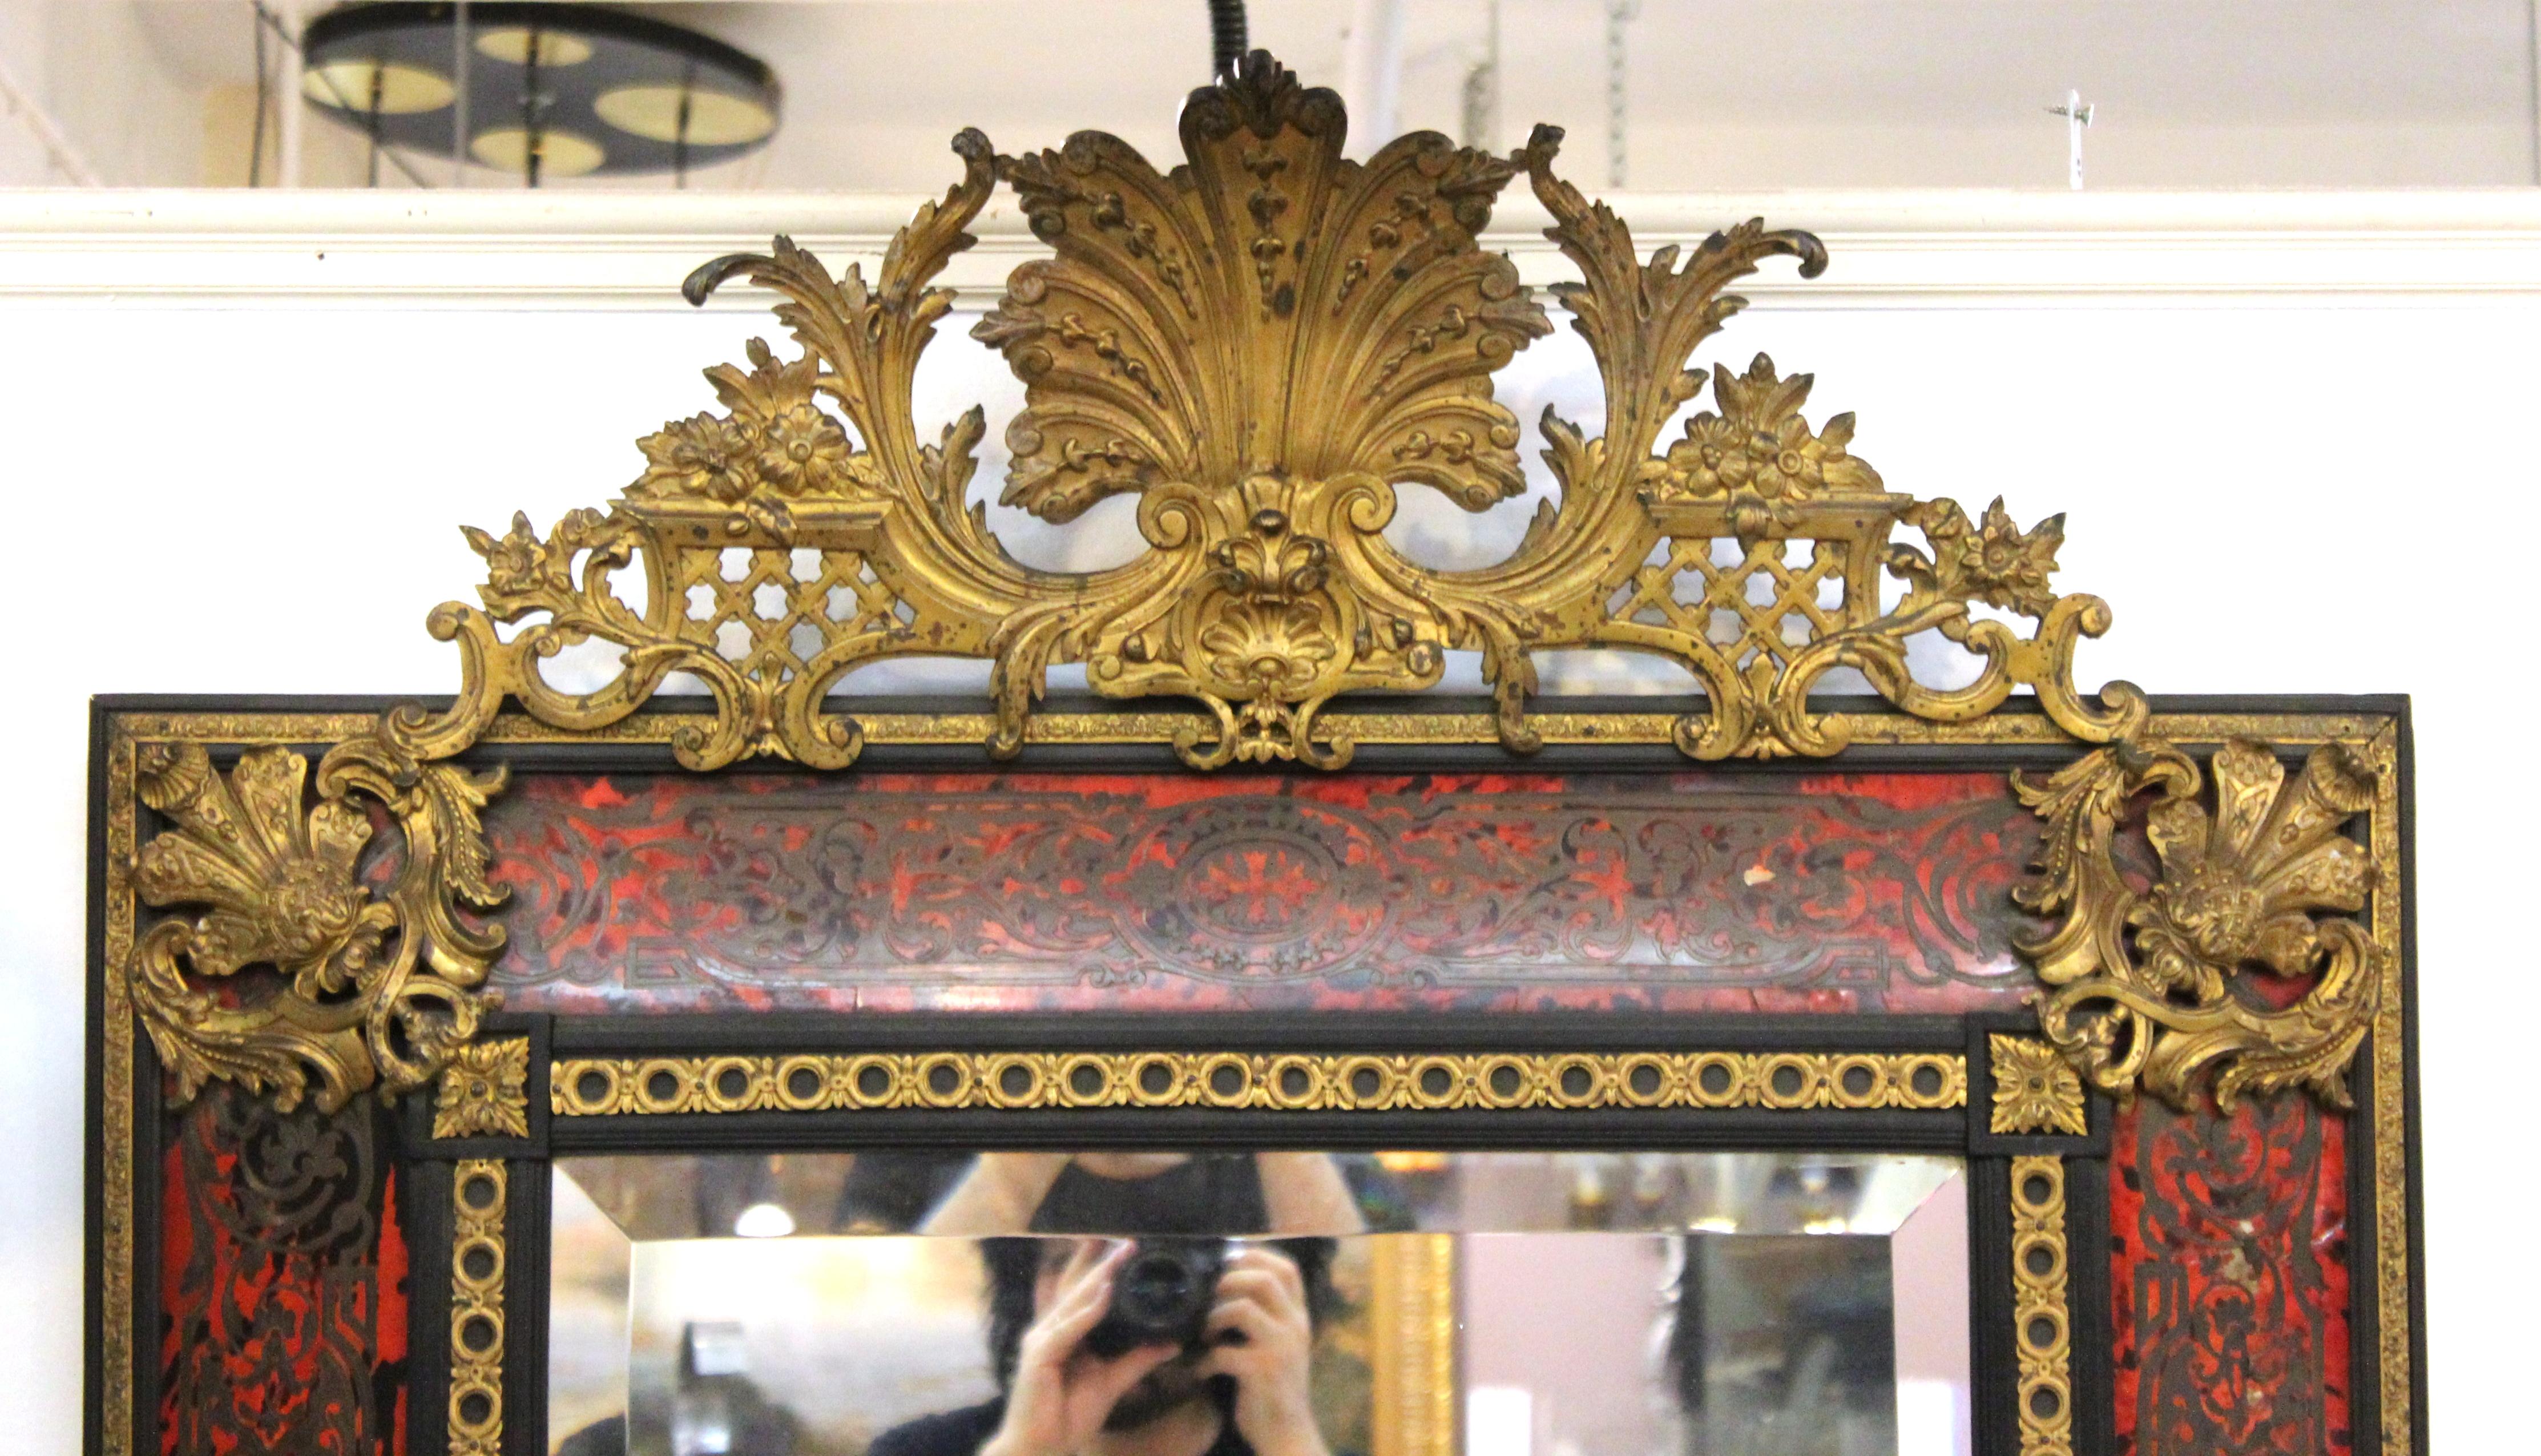 French Baroque Revival wall mirror with pediment and elaborate faux tortoiseshell band decor with Boulle style metal inlay. The piece was likely made during the late 20th century and is in great antique condition with age-appropriate wear and some